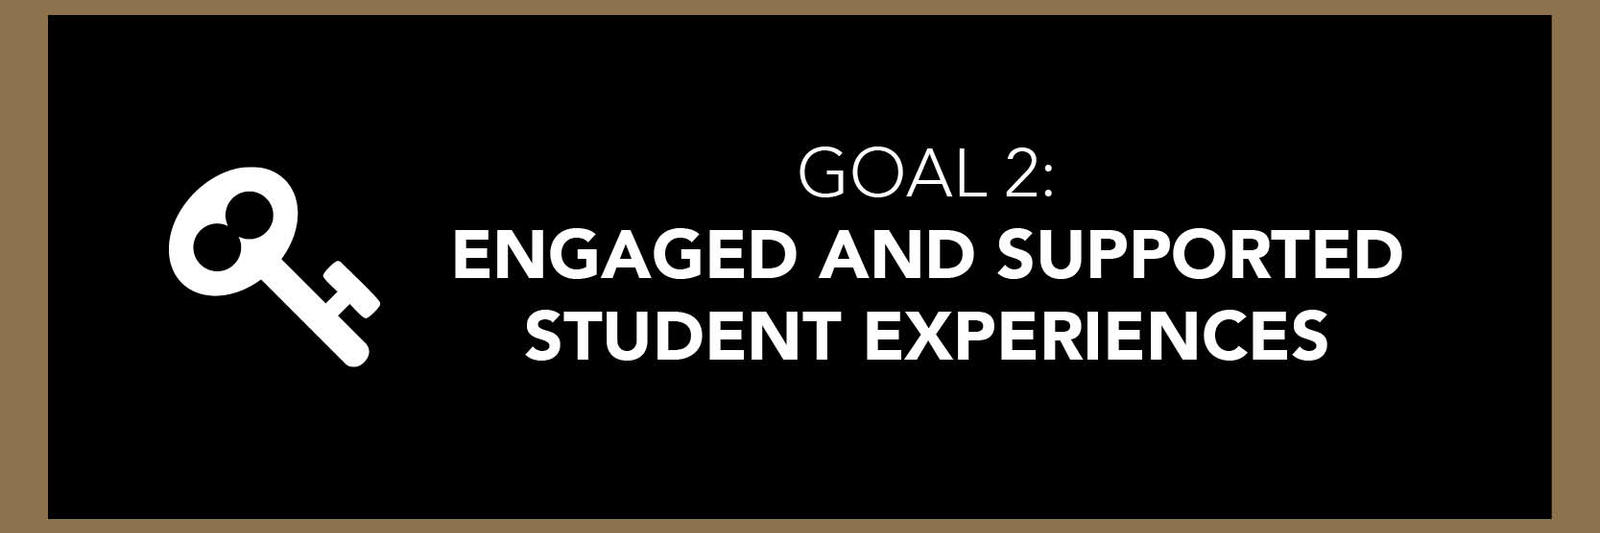 Goal 2: Engaged and Supported Student Experiences